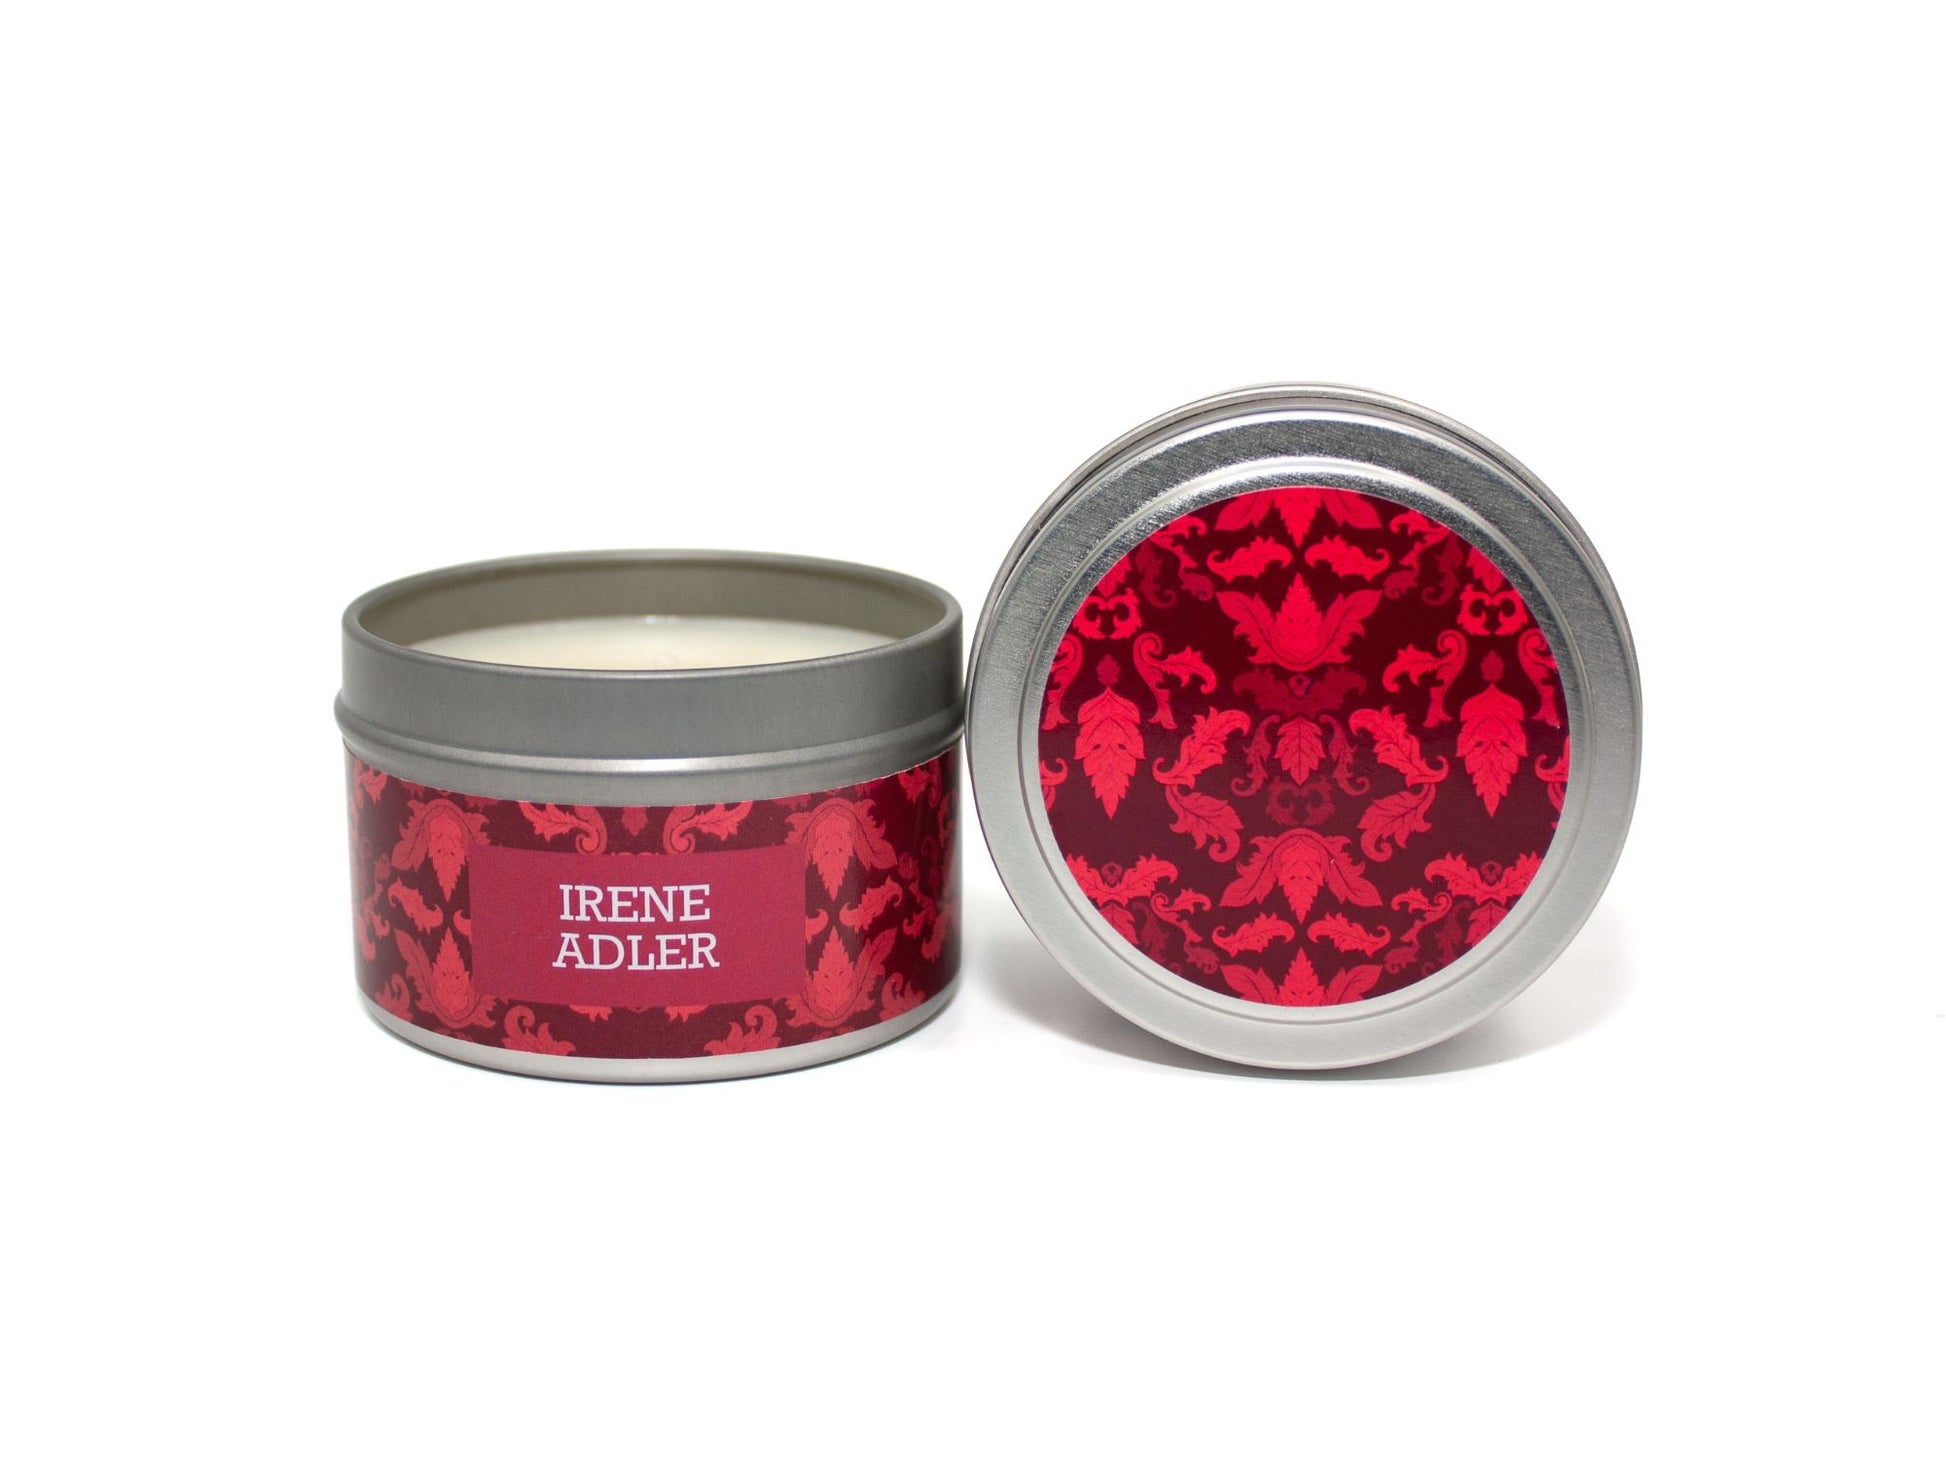 Onset & Rime ginger and amber scented candle called "Irene Adler" in a 4 oz silver tin. The circular label on top is a deep red Victorian pattern. The text on the front label is "Irene Adler - Ginger, Amber, Cedarwood".